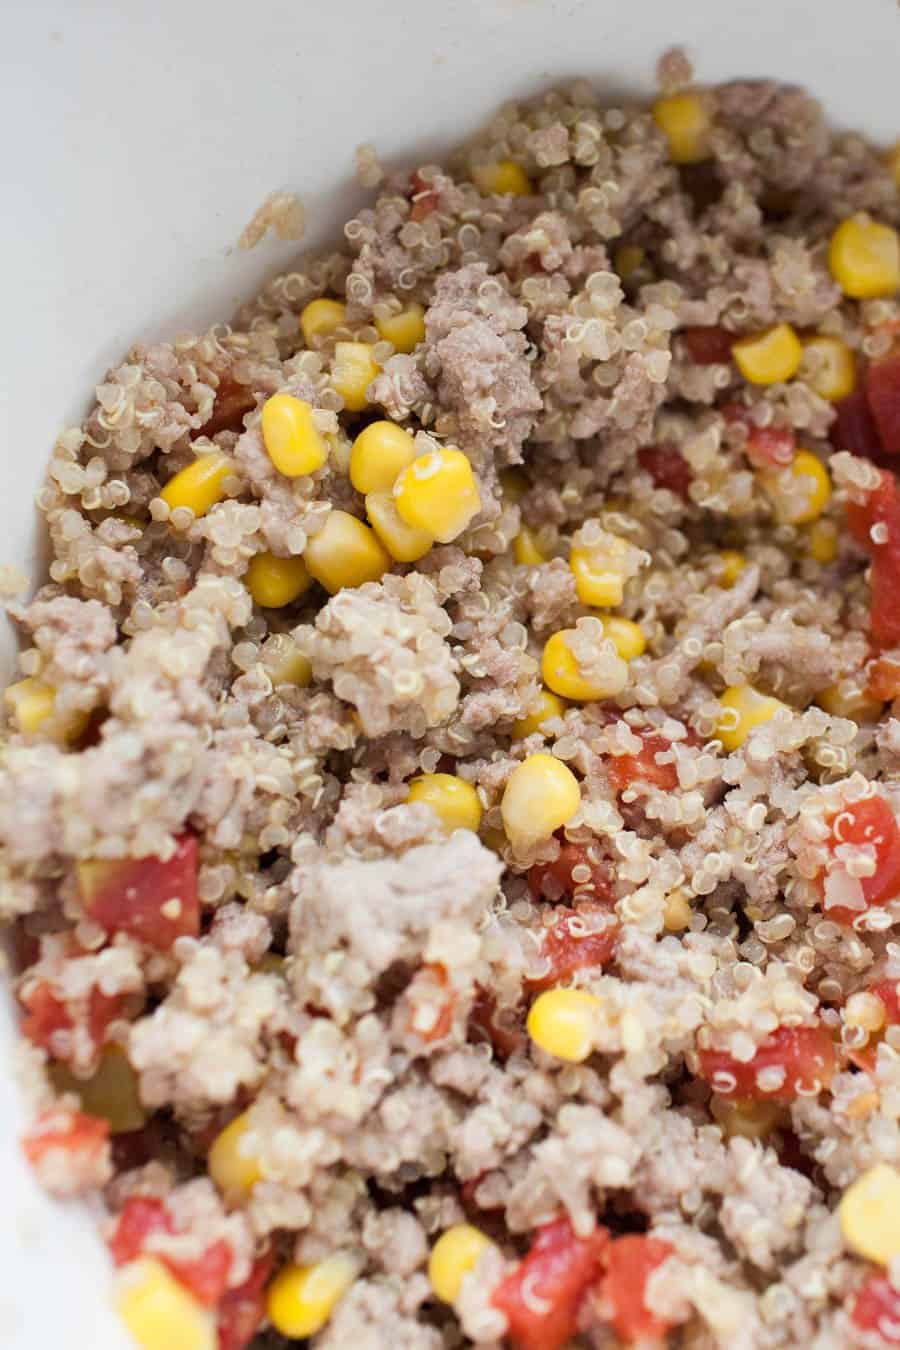 Turkey Quinoa Stuffed Bell Peppers make an easy dinner that is delicious for the whole family! It's super easy to customize this to anyone's taste palate and will have a hearty, seemingly fancy meal on the table quickly. These stuffed bell peppers are great for any time of year. Made with turkey, quinoa, tomatoes, corn and beans, all stuffed in a bright bell pepper and topped with cheese!